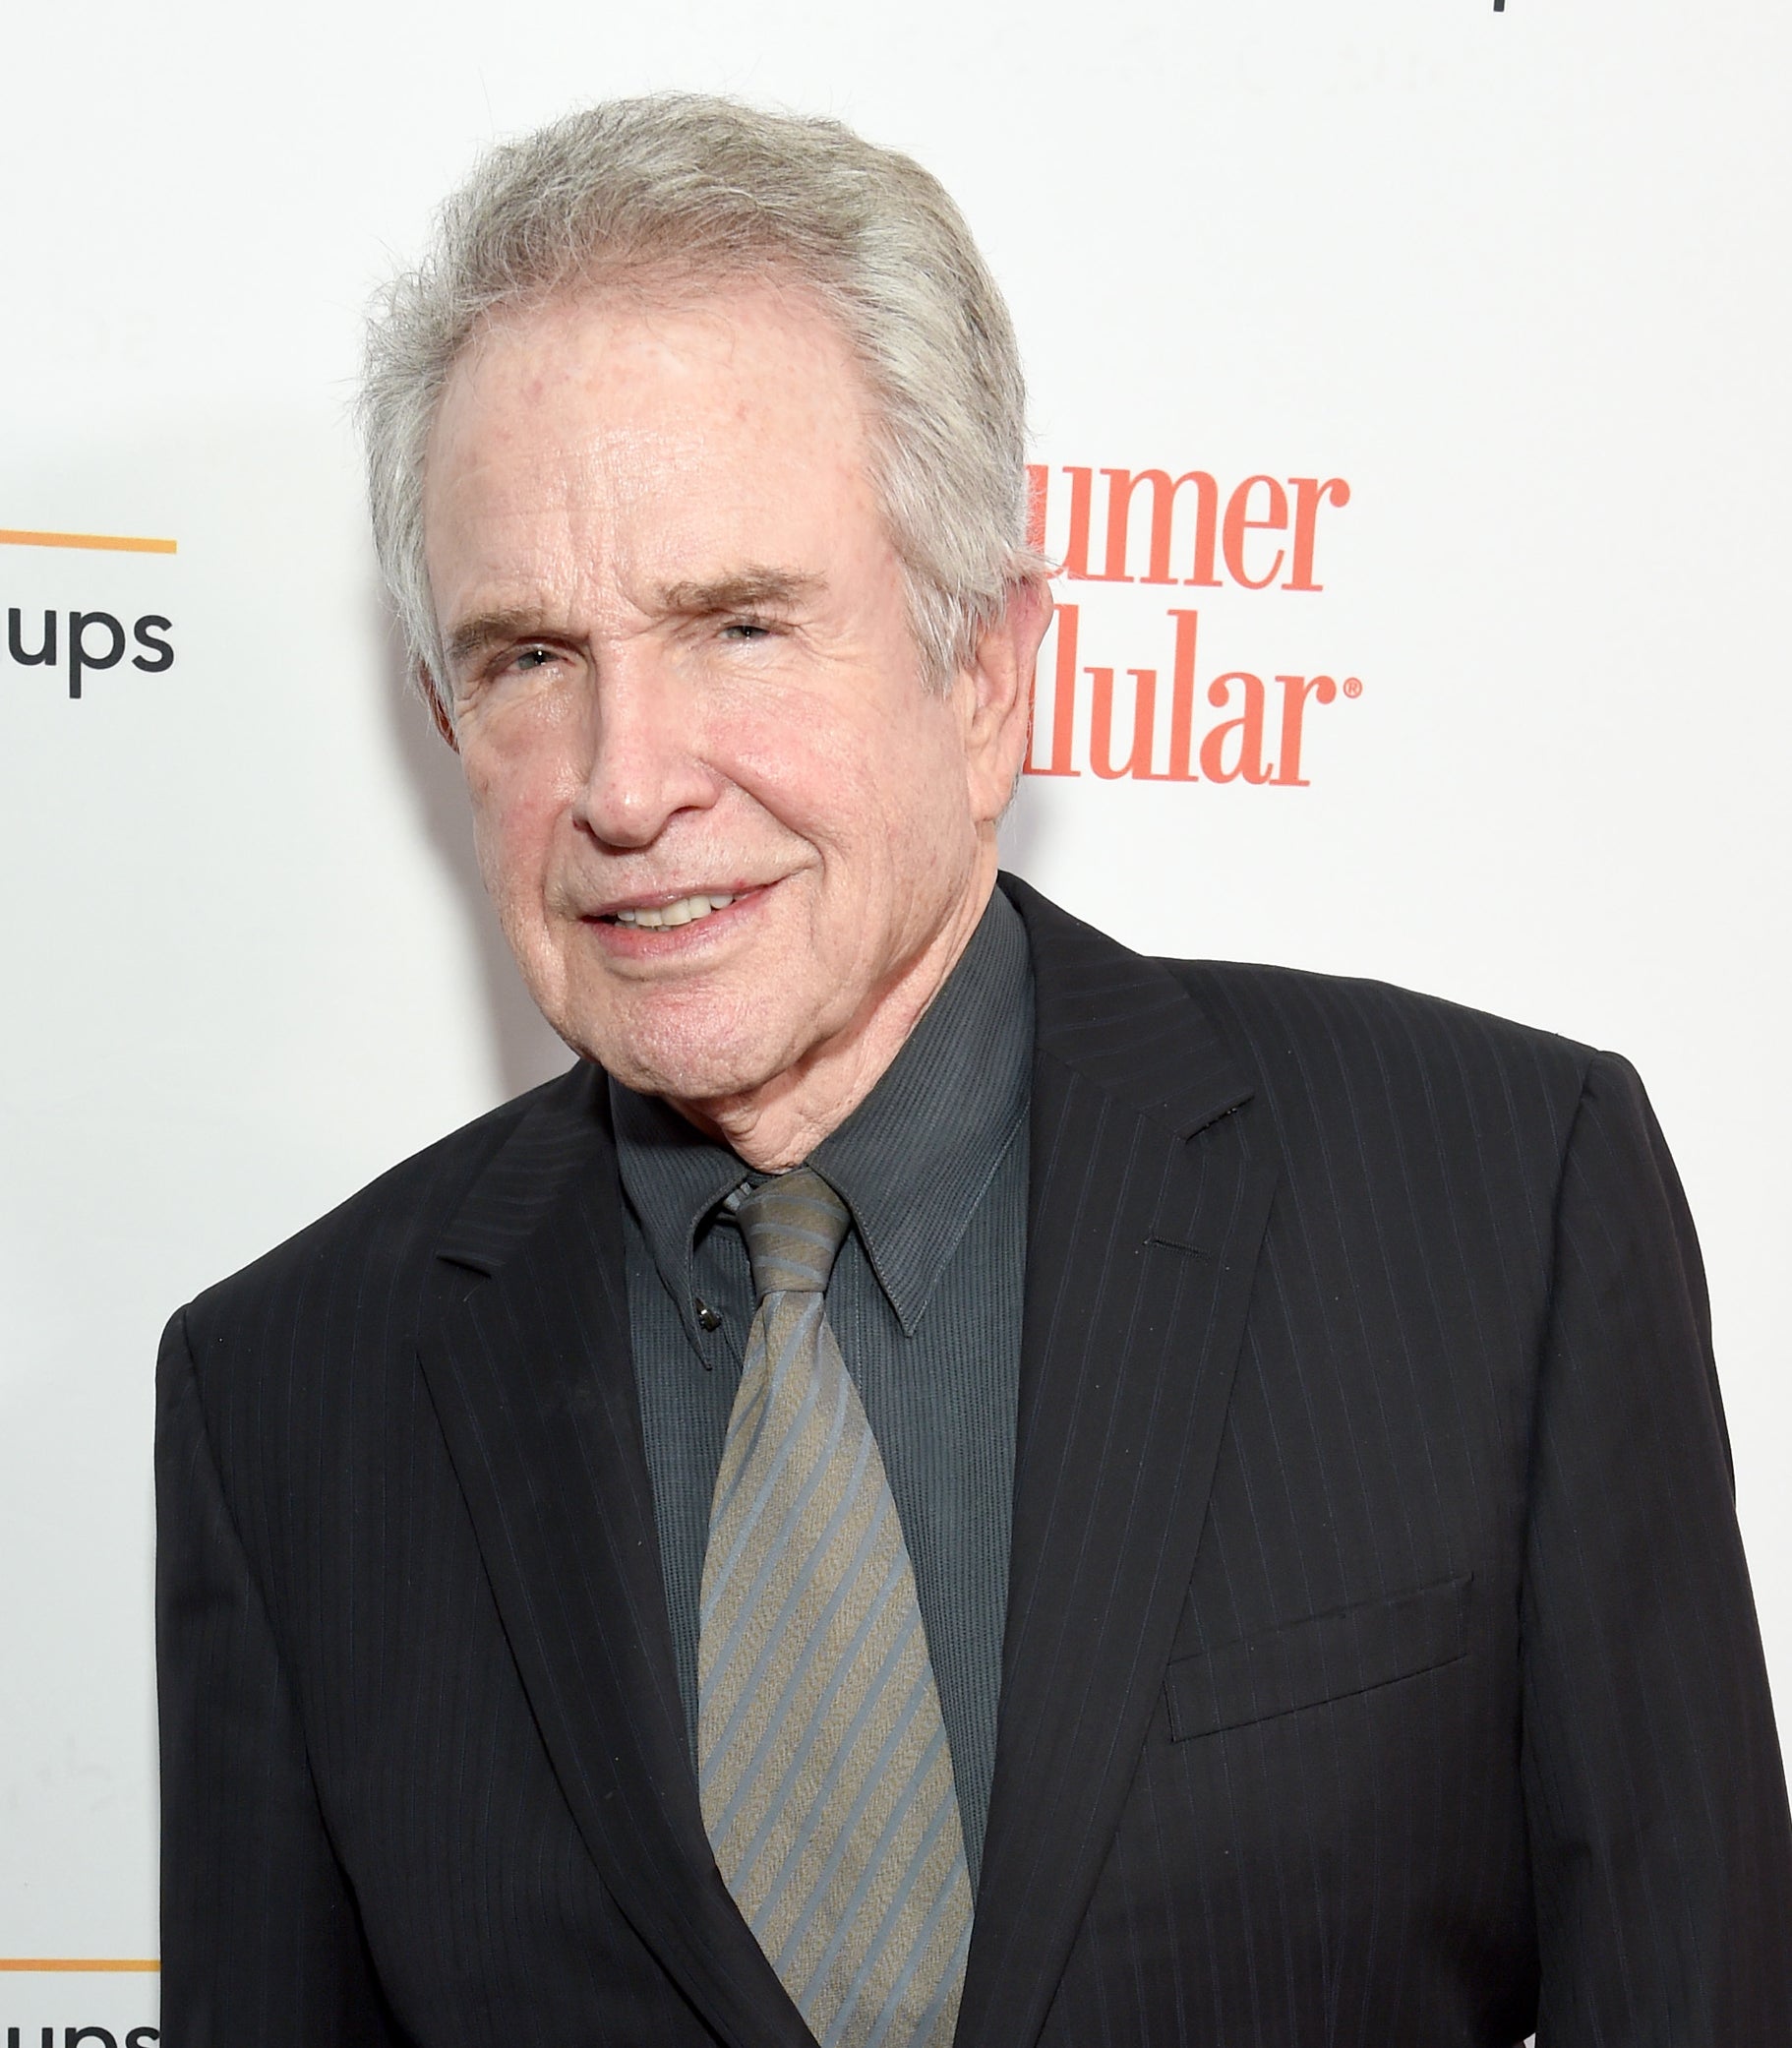 Warren Beatty in a pin-striped suit and tie at an event